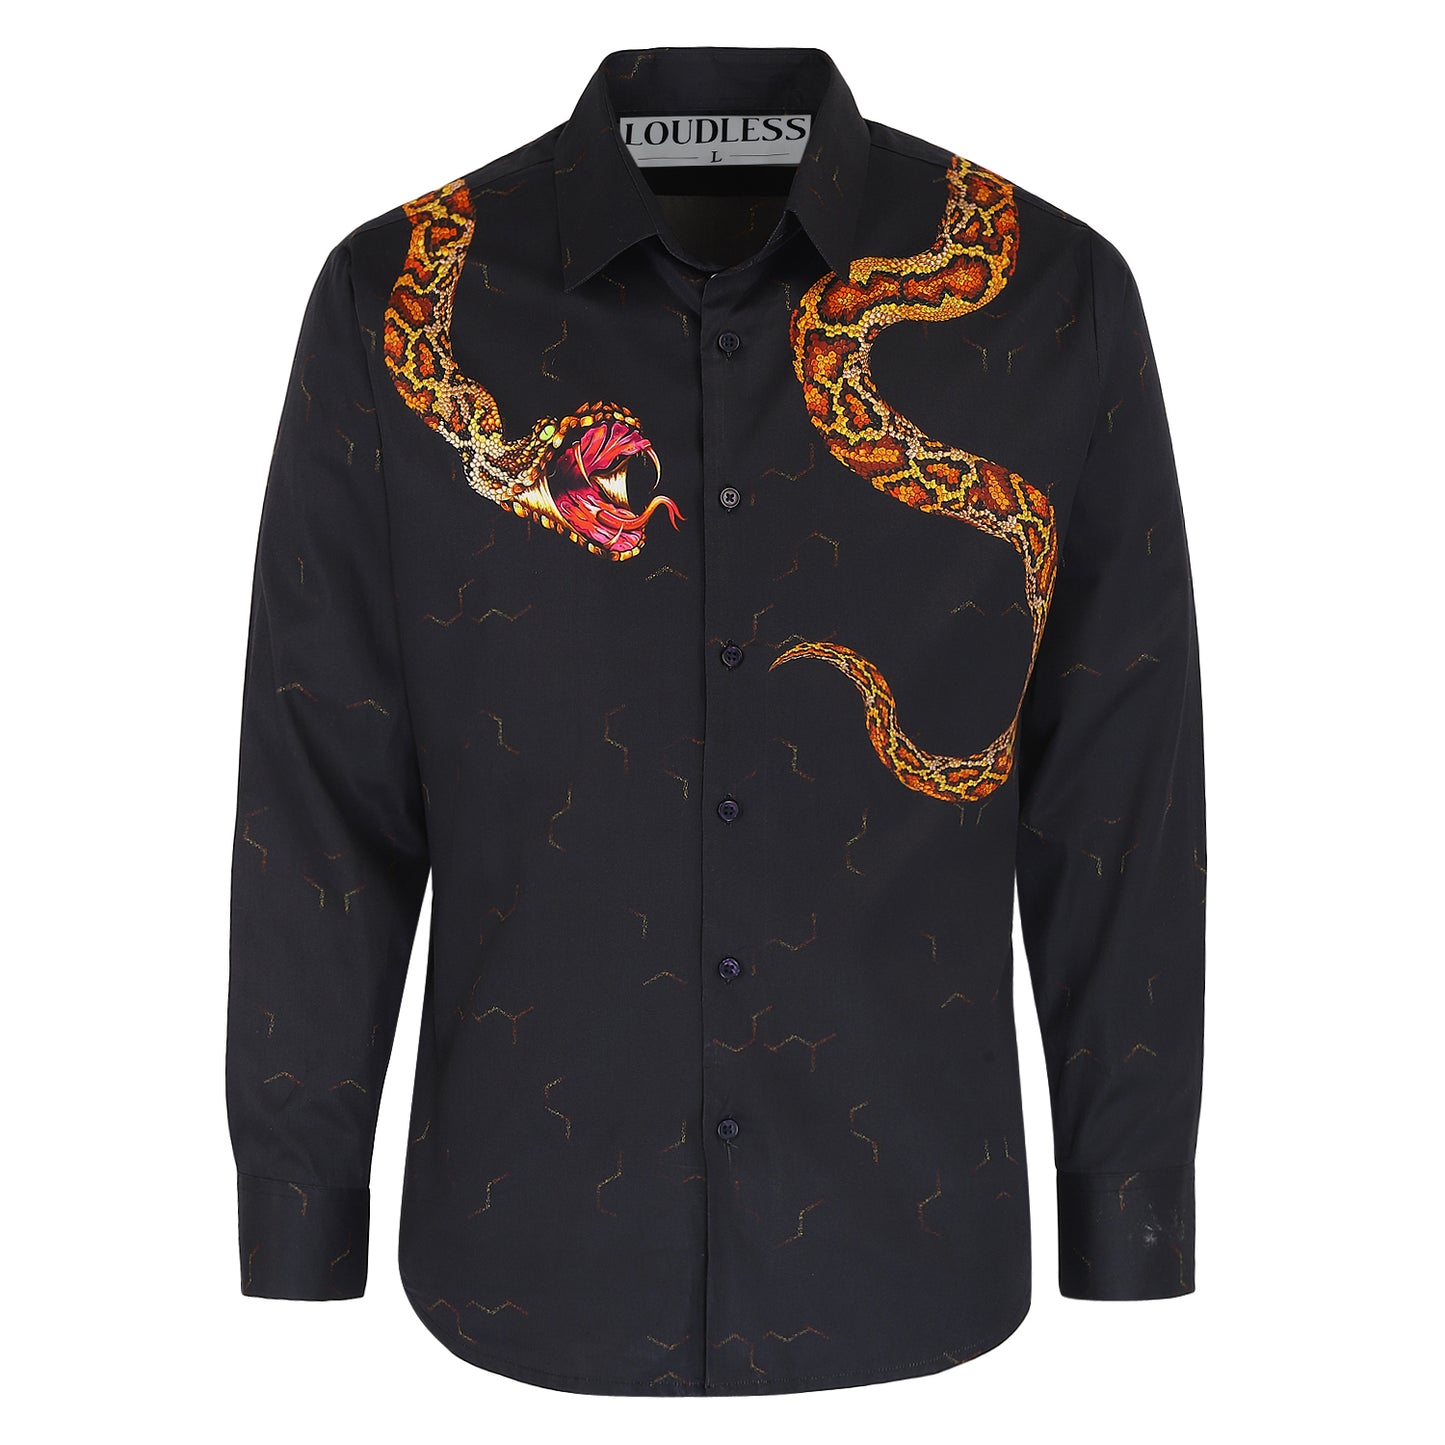 Luxury printed Serpent shirt by LoudLess